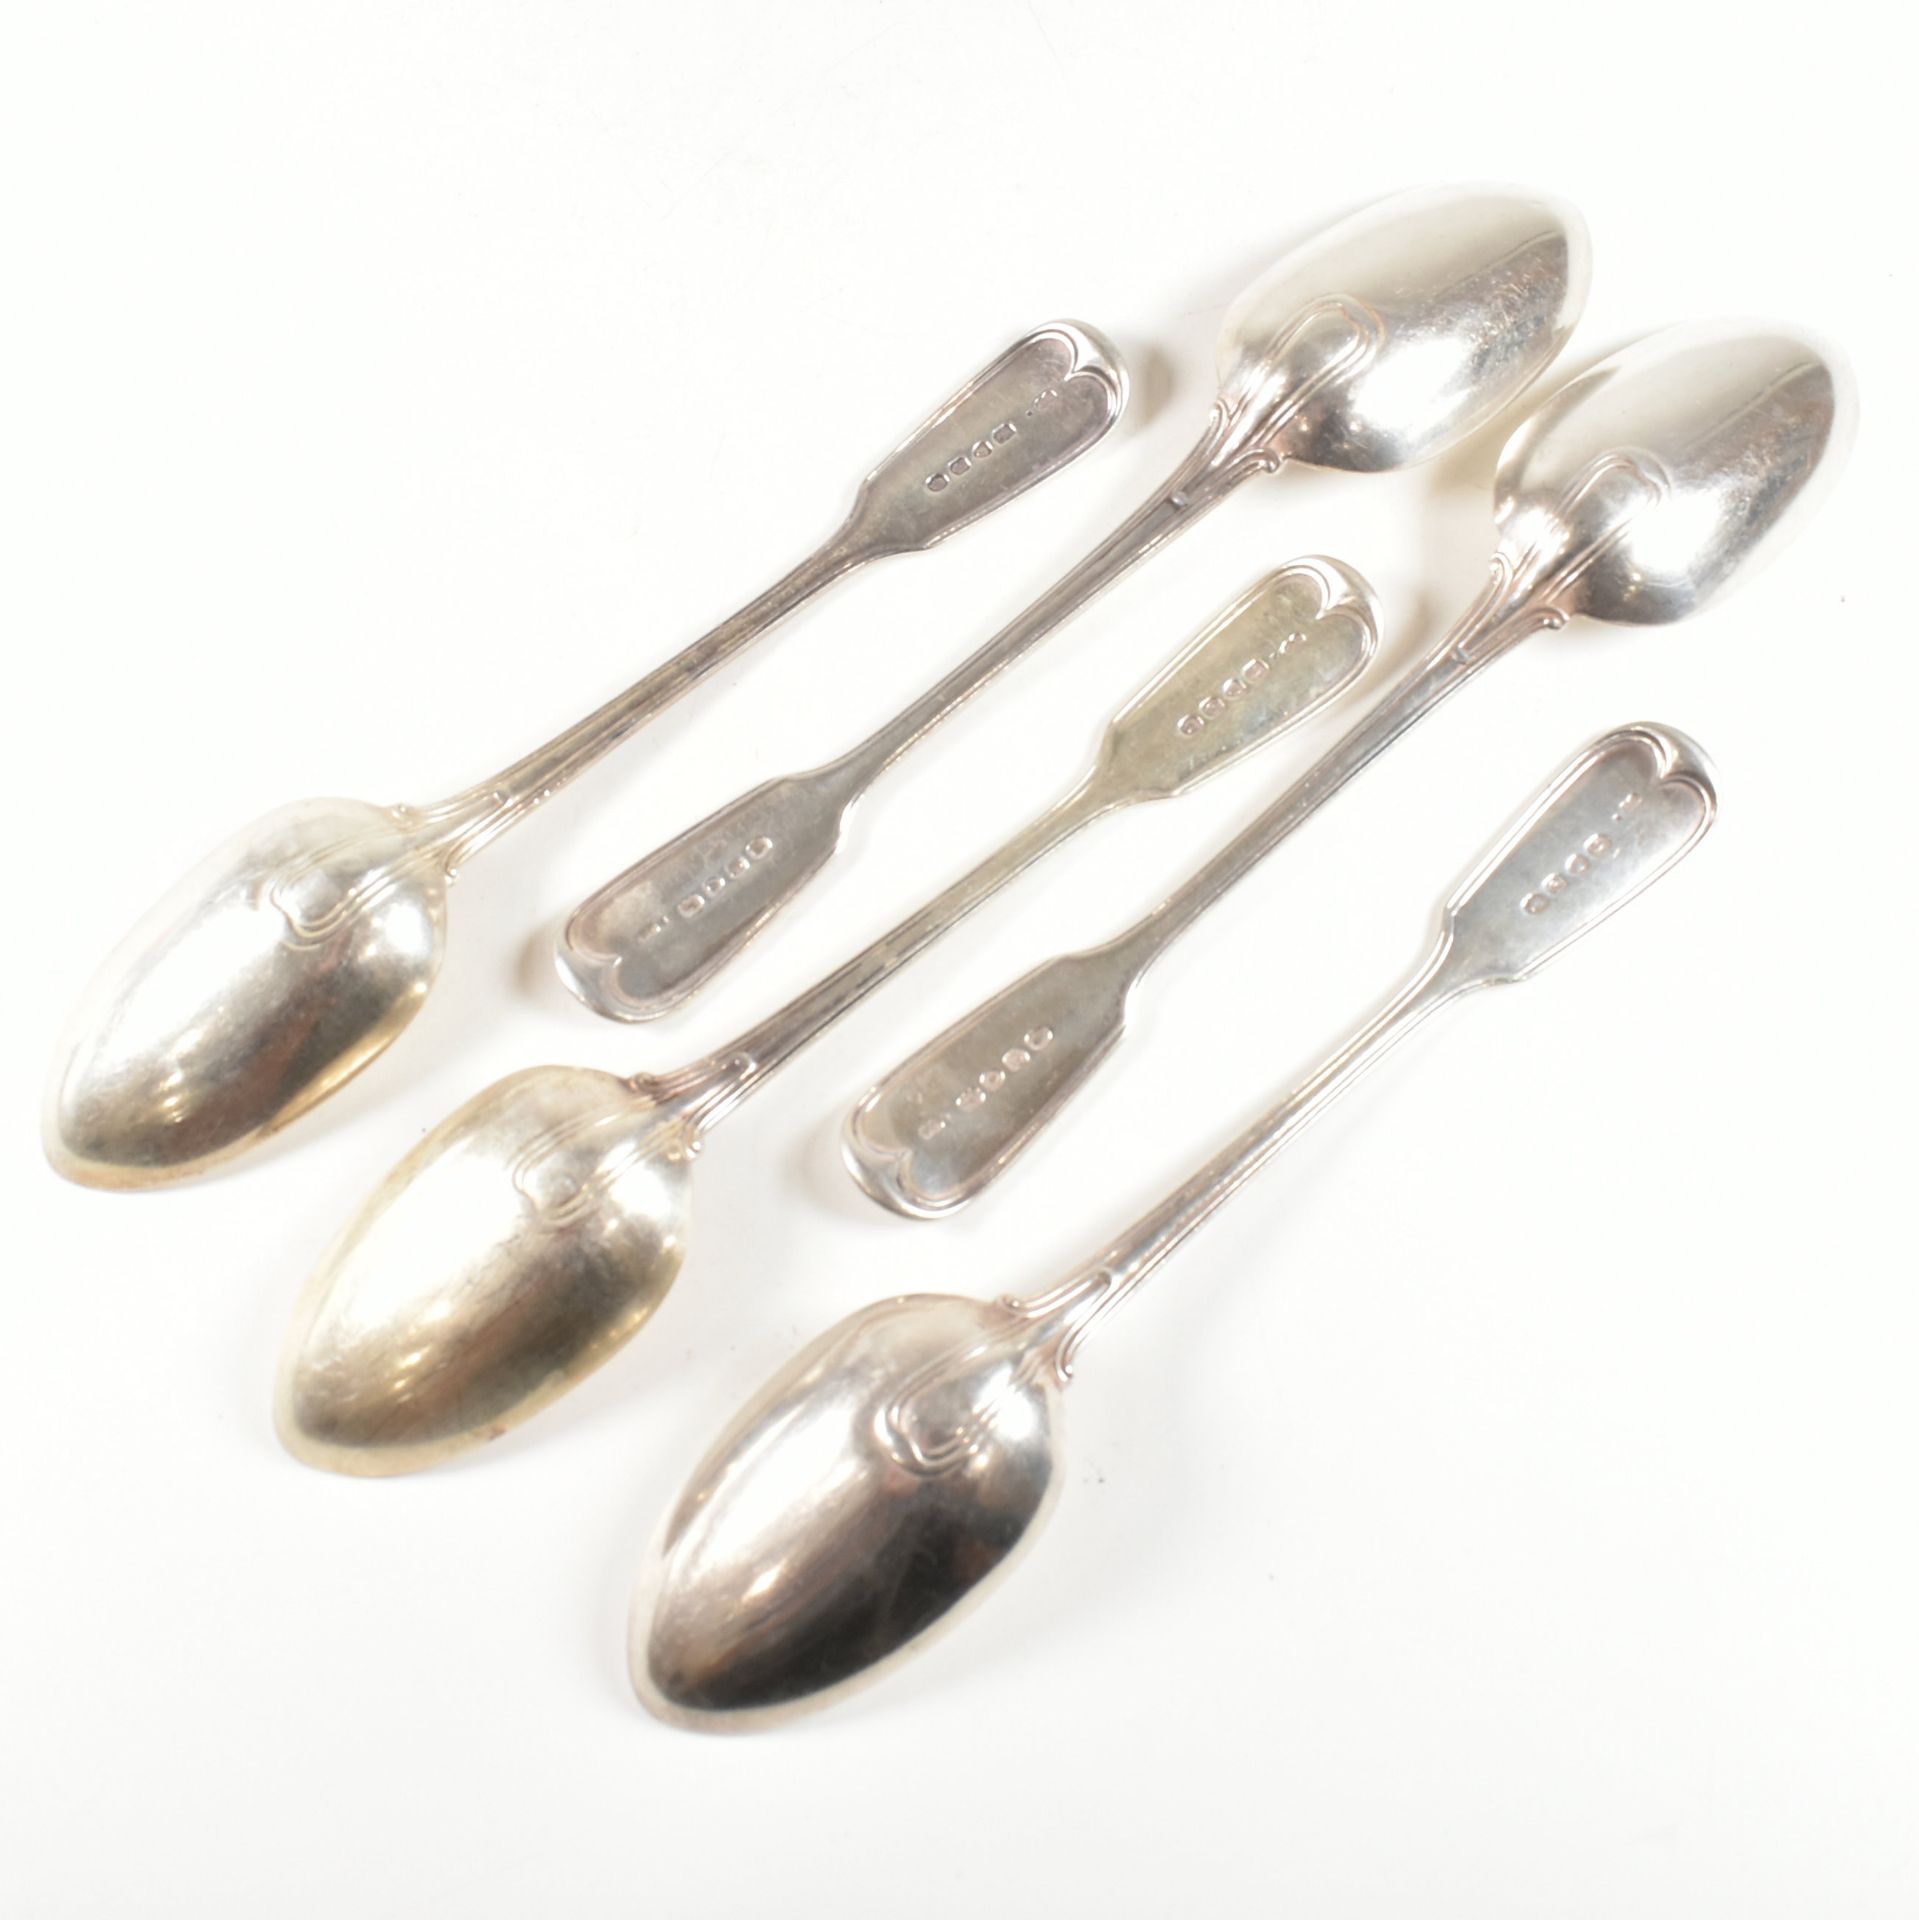 FIVE VICTORIAN HALLMARKED SILVER SPOONS - Image 3 of 7